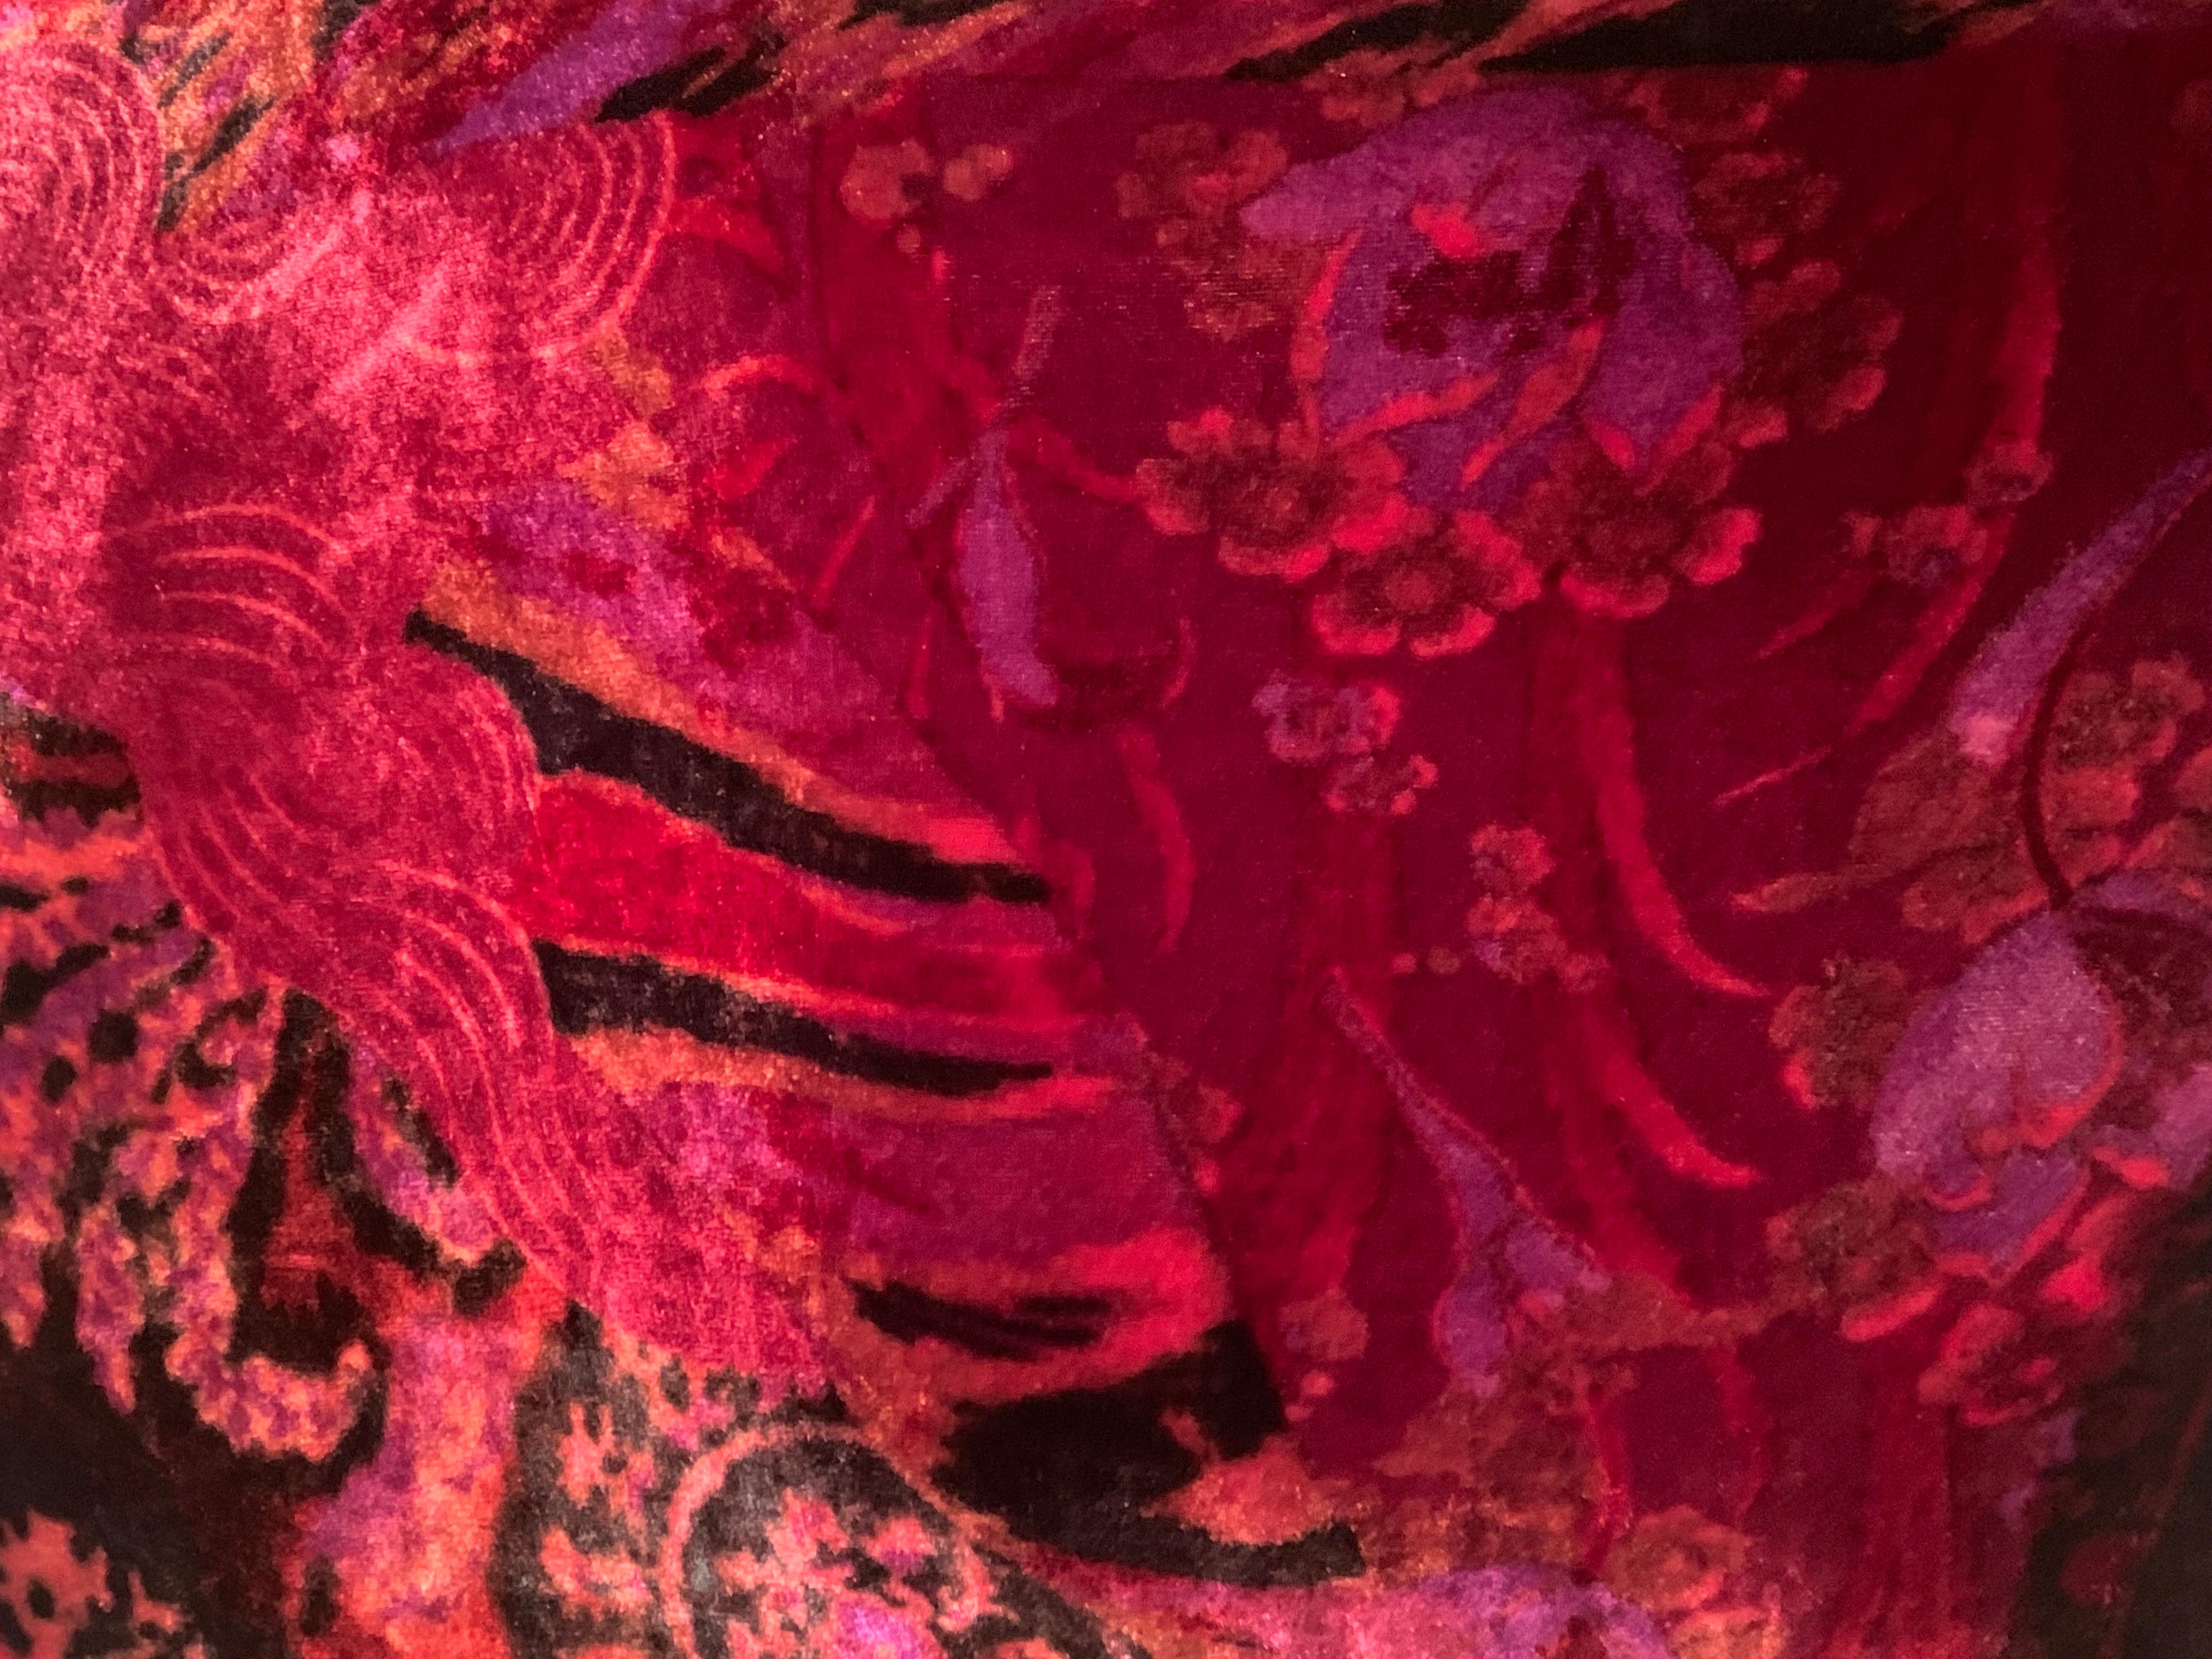 This gorgeous Etro shawl is reversible, one side is a beautiful contemporary paisley design on silk velvet in lush shades of burgundy, purple and black. The more subdued side of the shawl is made from black cashmere. It is in excellent condition.